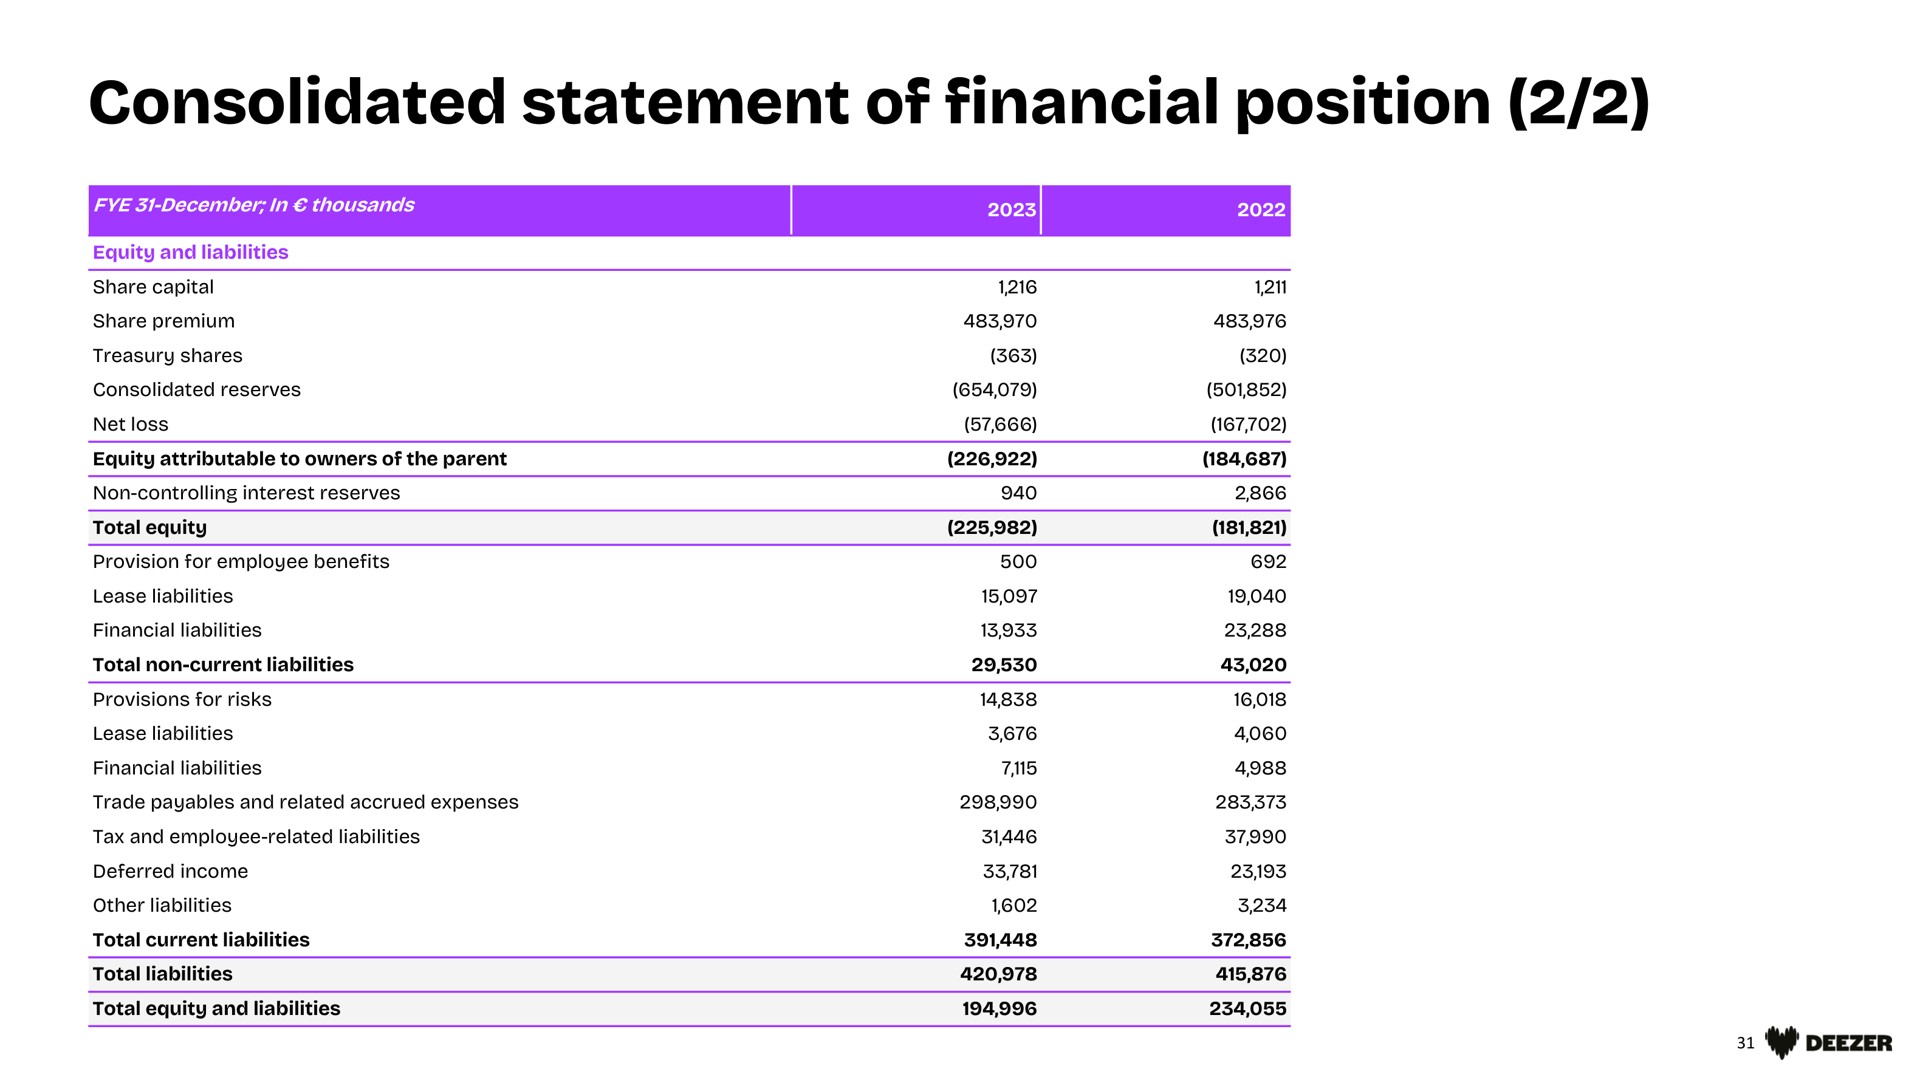 consolidated statement of financial position | Deezer